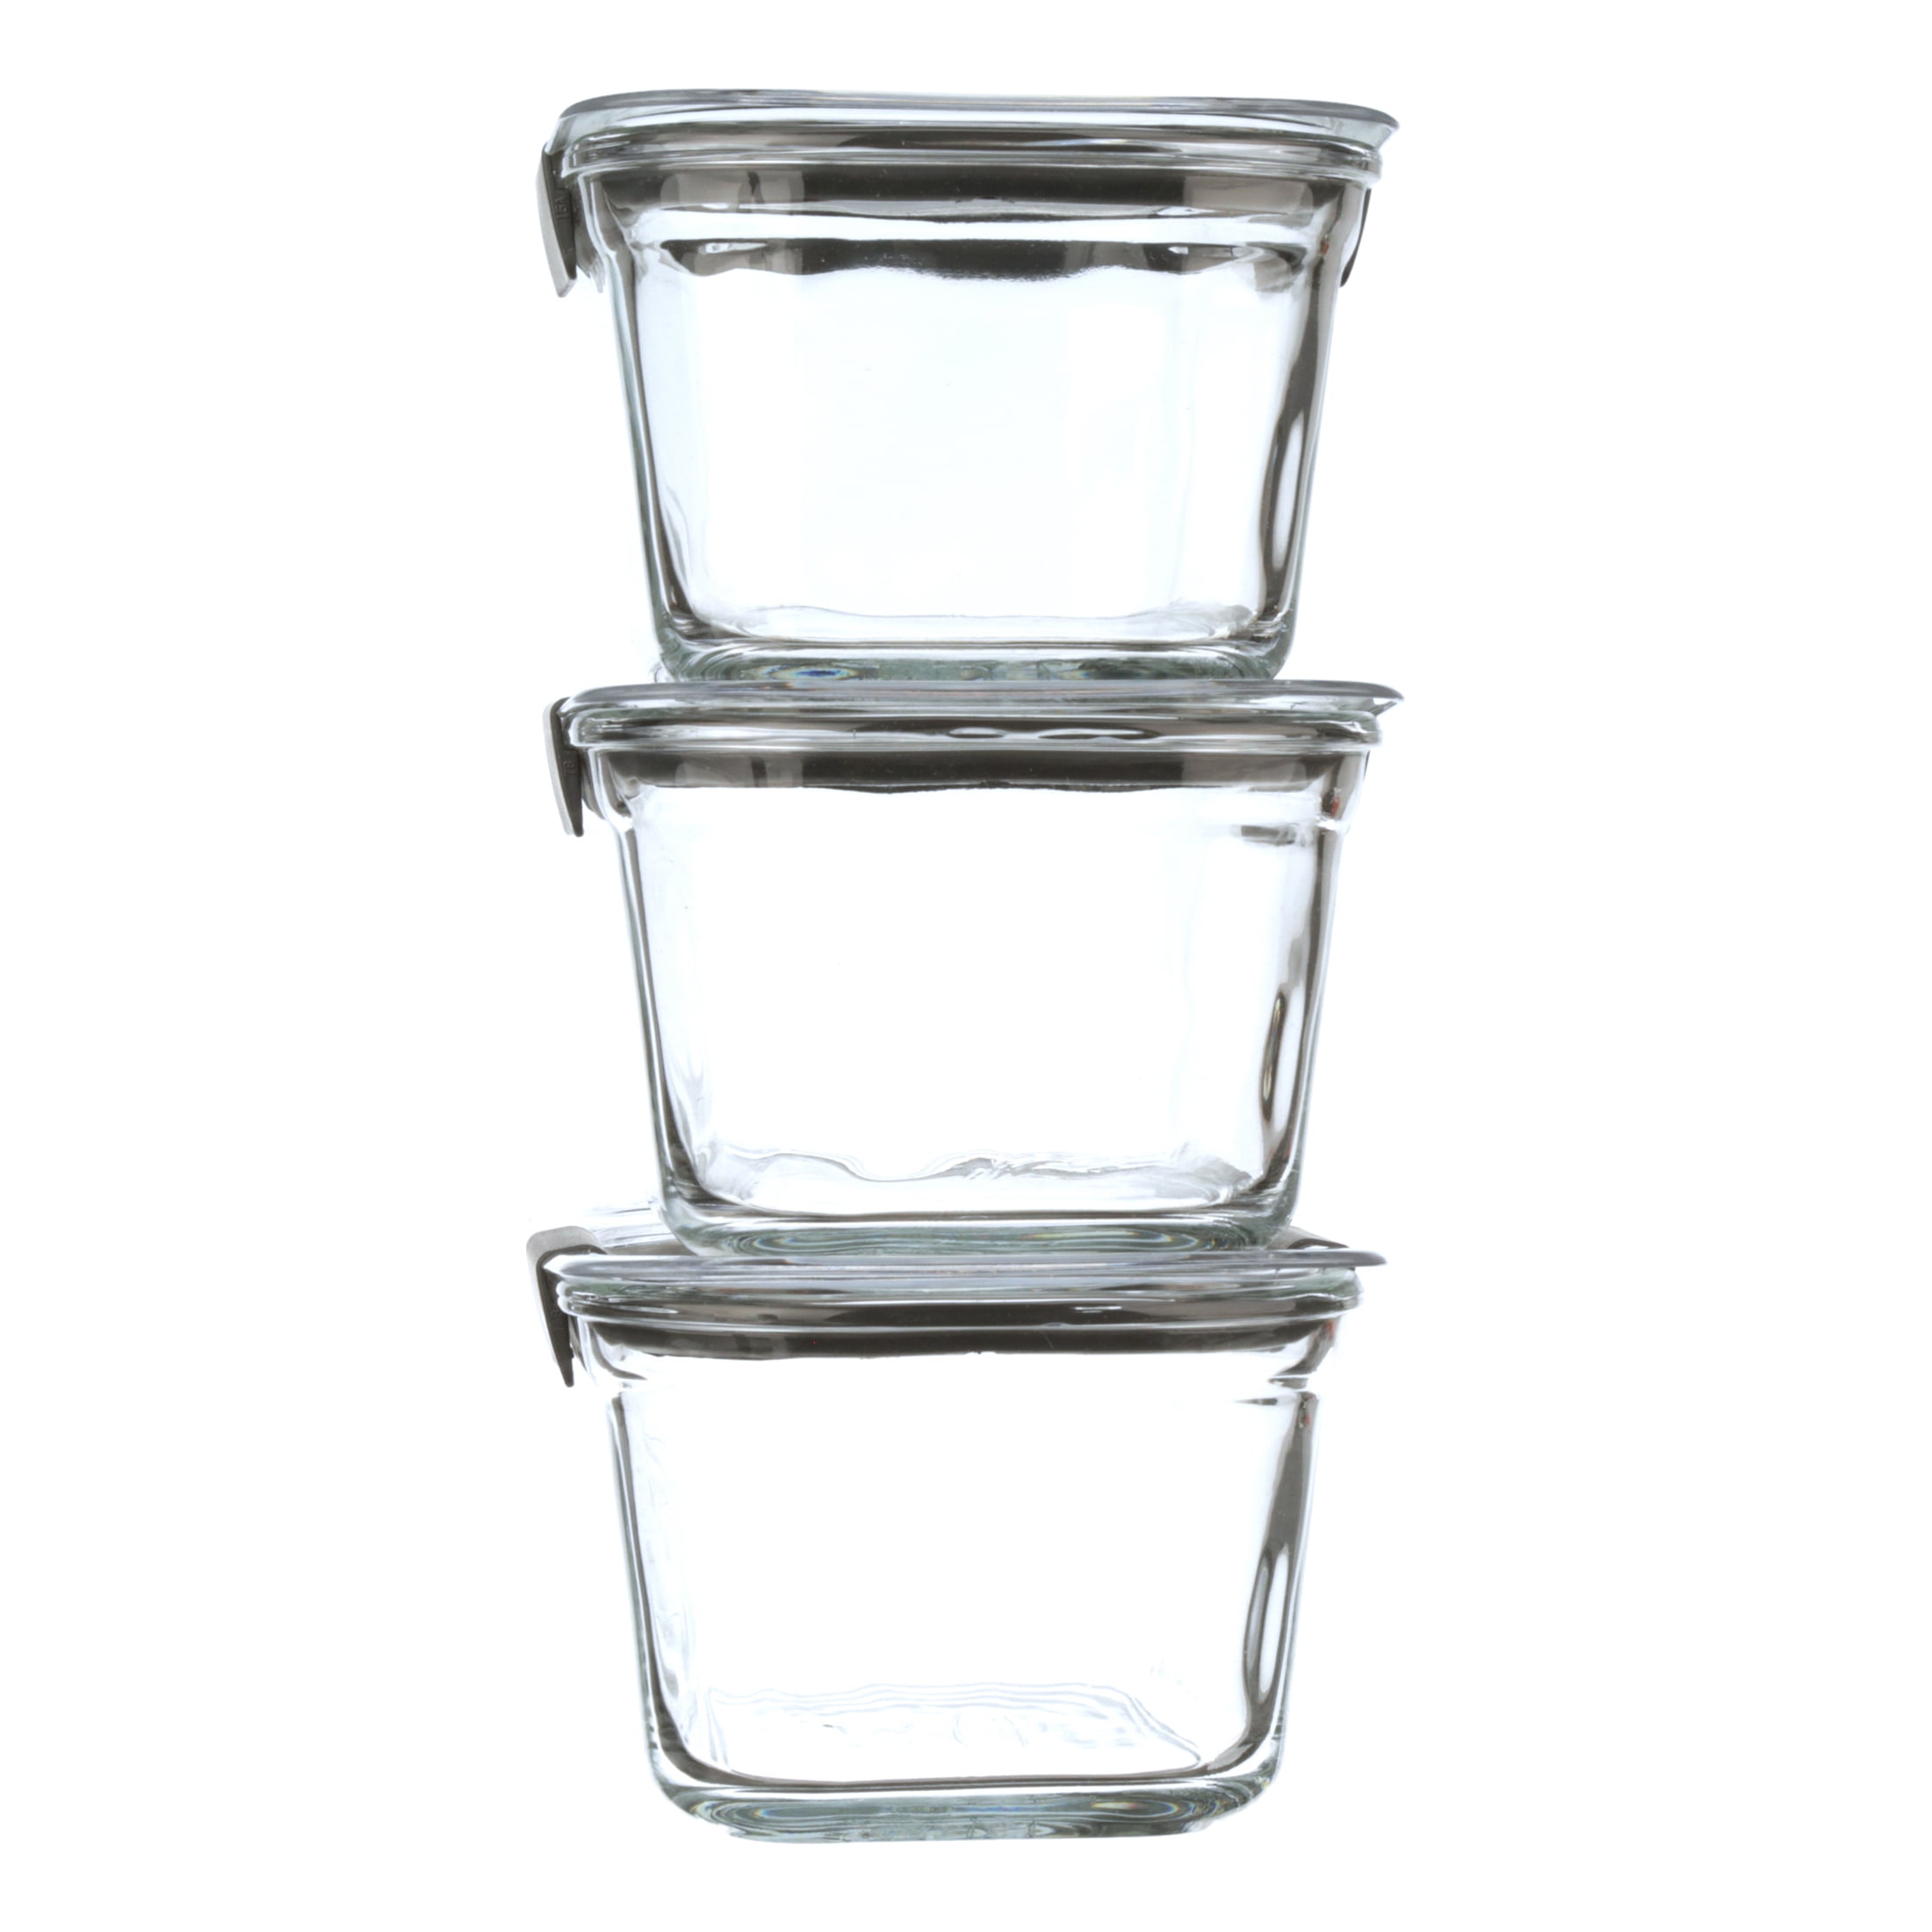 4.7 Cup Medium Stain-Proof Food Storage Container, Set of 2 Glass